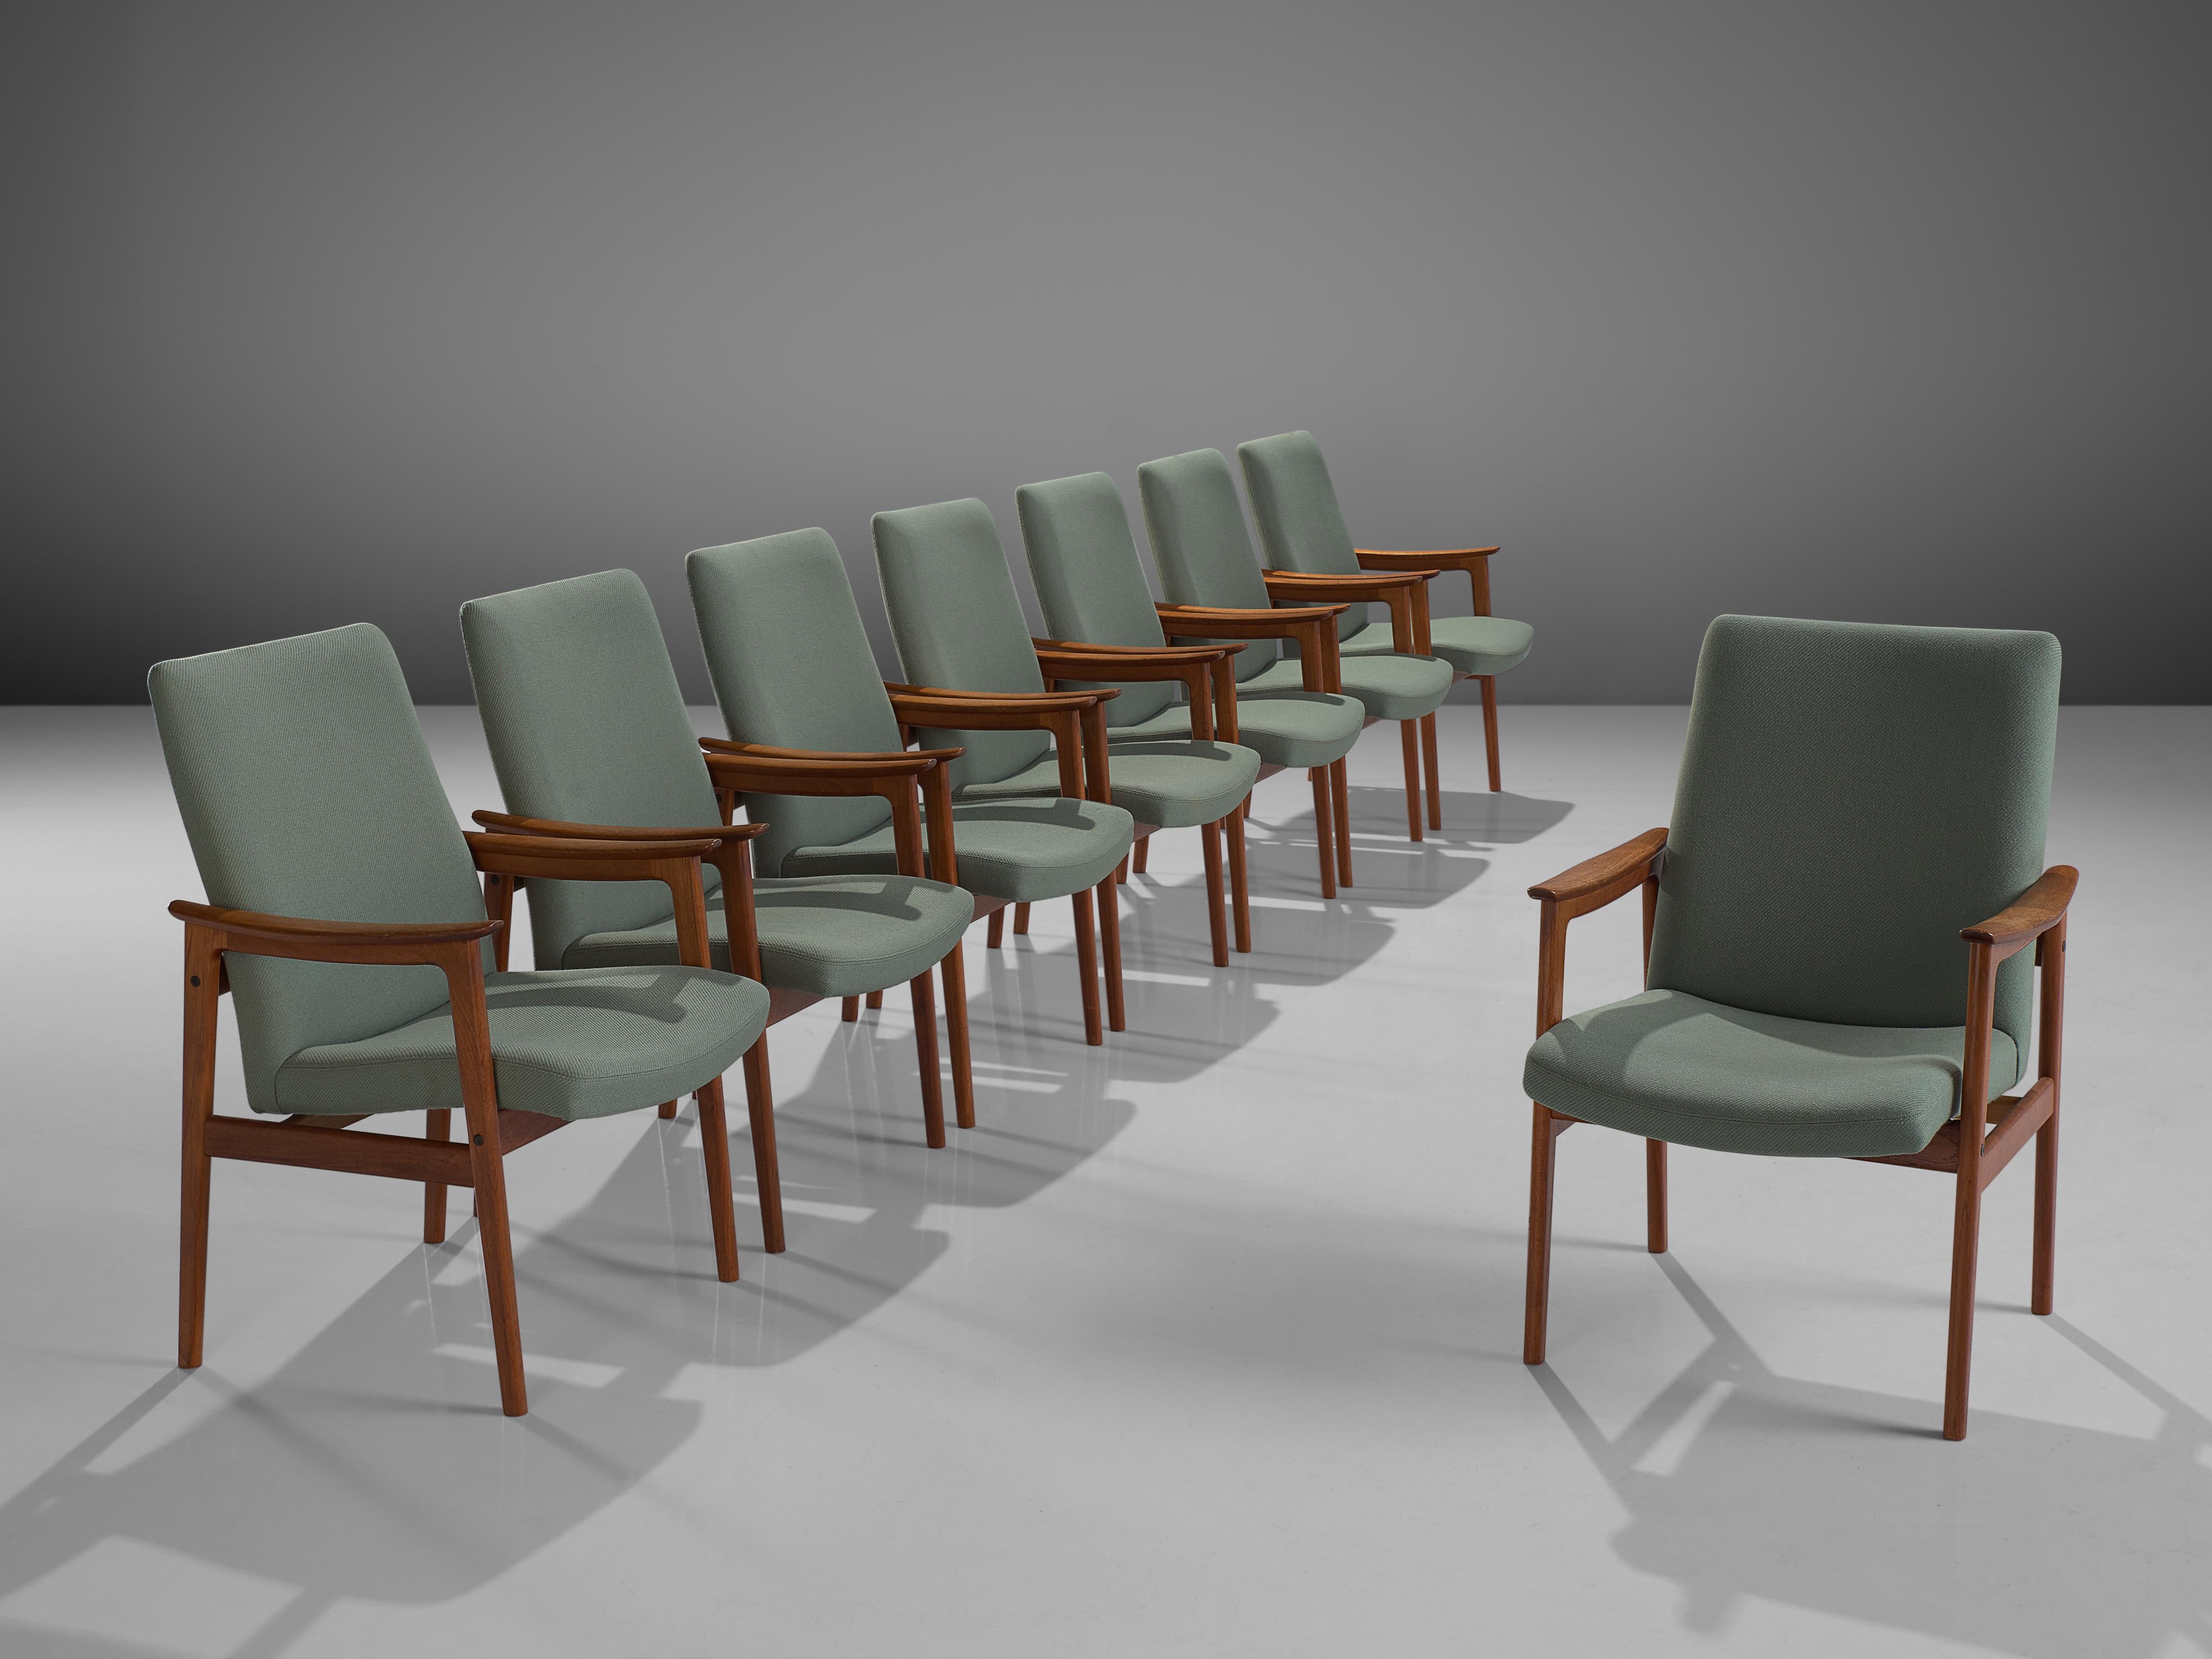 Set of eight armchairs, teak and mint green fabric, Scandinavia, 1950s. 

These Scandinavian teak dining chairs with armrests are both stately and modest. This set has an elegant teak frame with a beautiful visible grain. Nicely curved armrests and